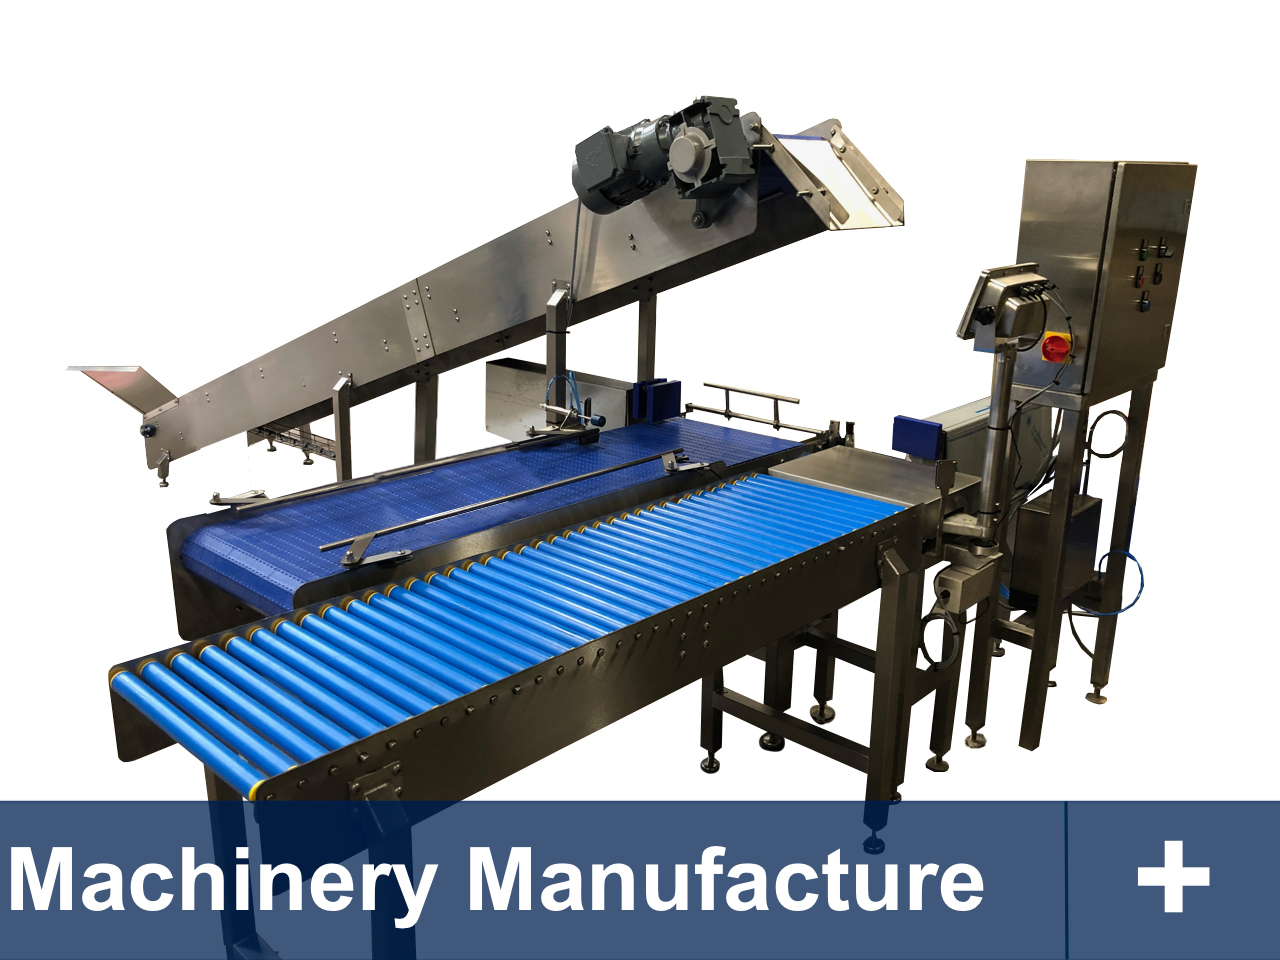 Food Machinery Manufacture